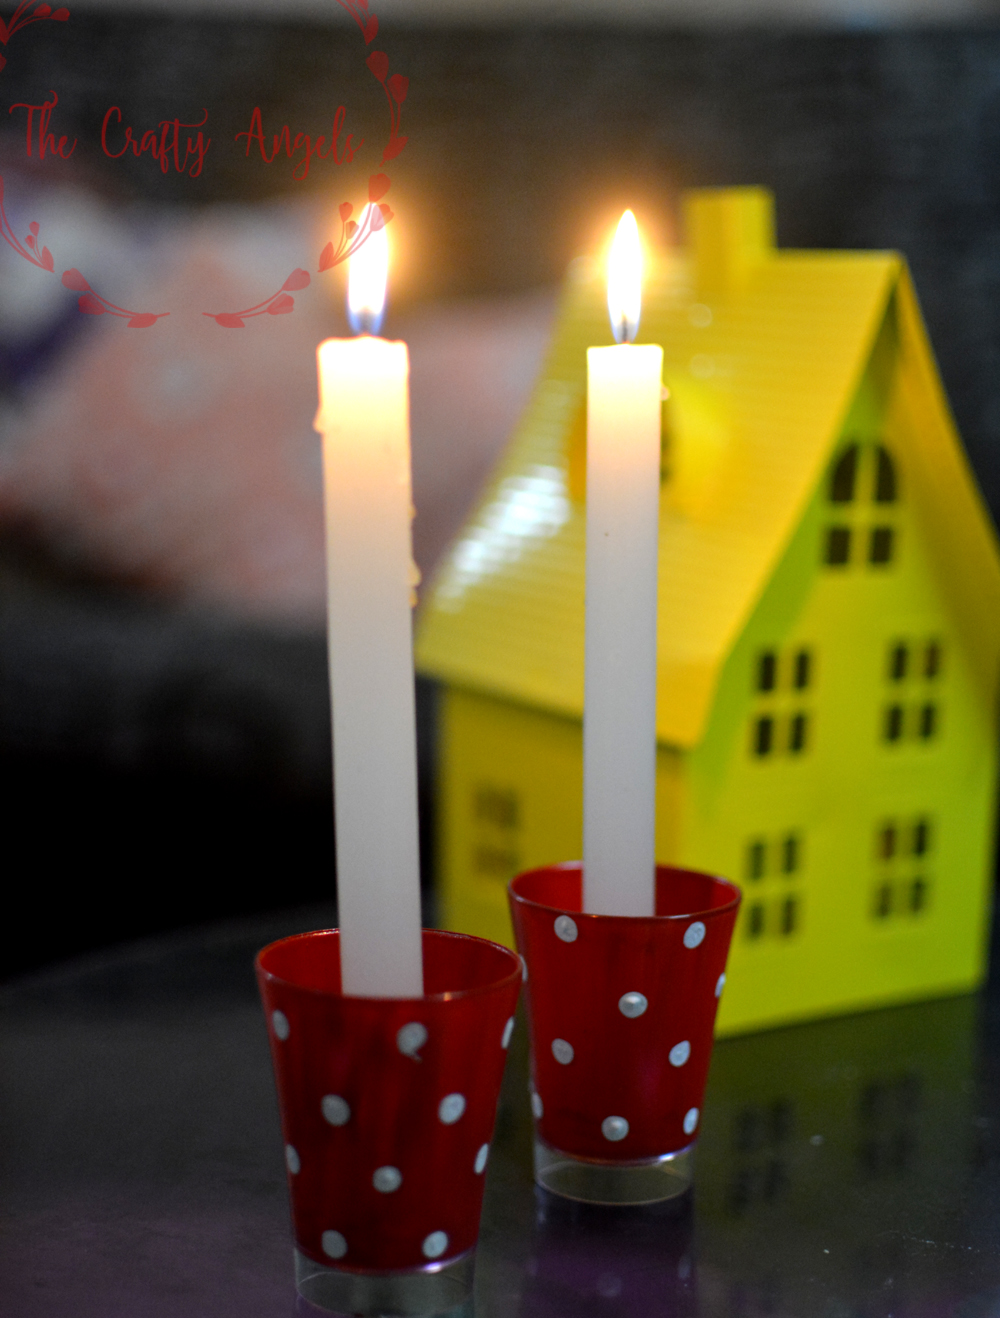 DIY Advent candle holder, advent candle ideas, advent candle decor, christmas candle holder, shot glass recycle, shot glass, candle holder, diy candle decor, advent candle ideas, advent wreath idea, christmas decor, candle centerpiece, advent candle diy, advent candle, christmas inspiration, christmas diy, diy candle project